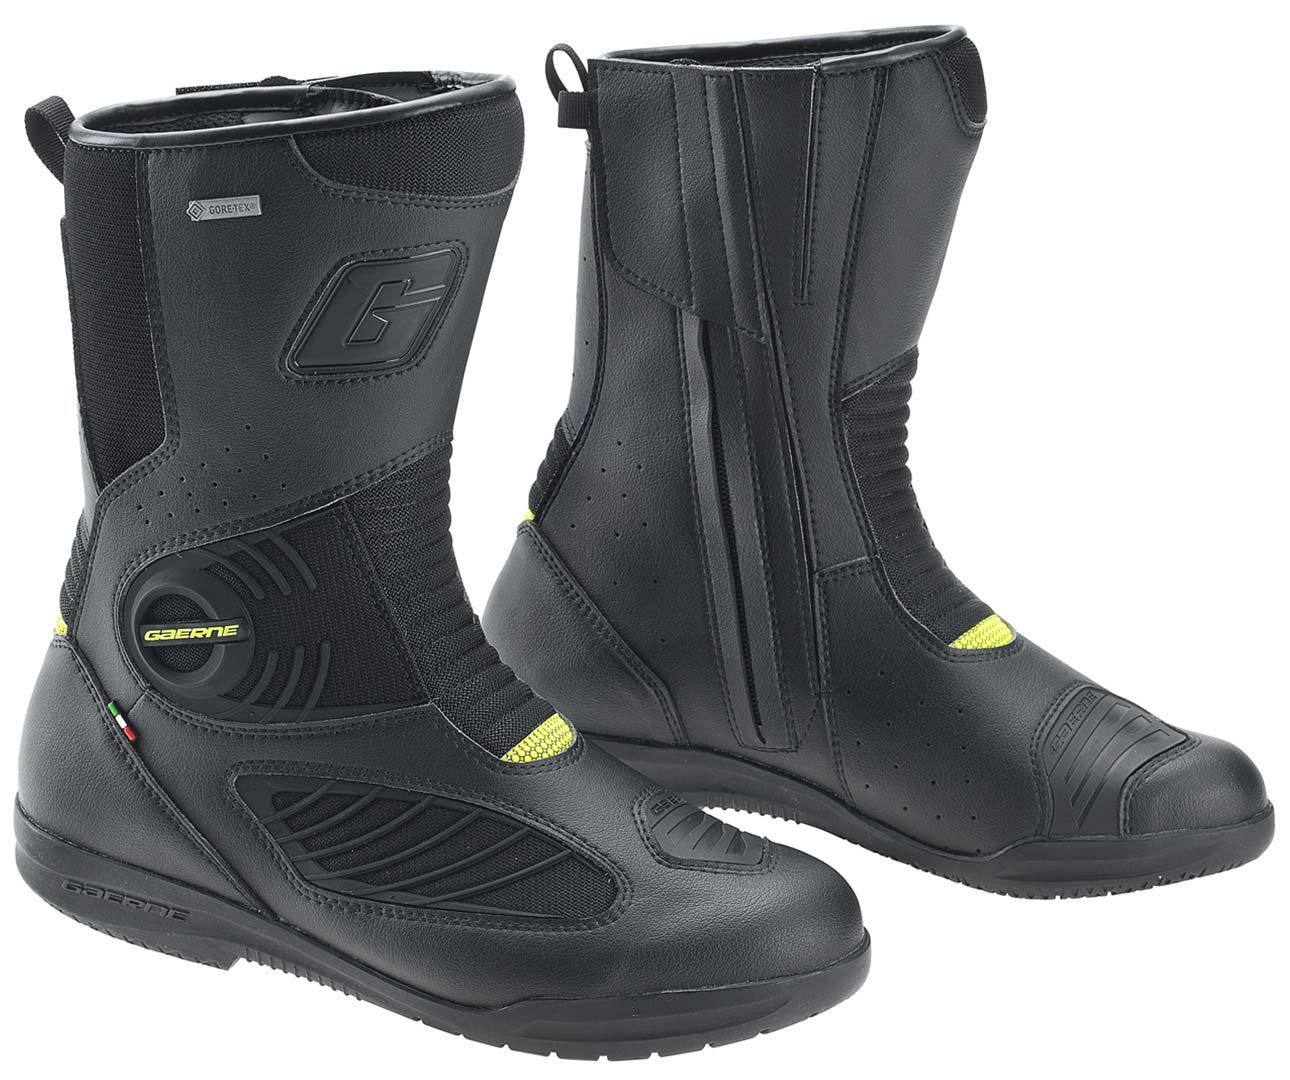 Buy Gaerne G.Air Gore-Tex Boots Online with Free Shipping – superbikestore